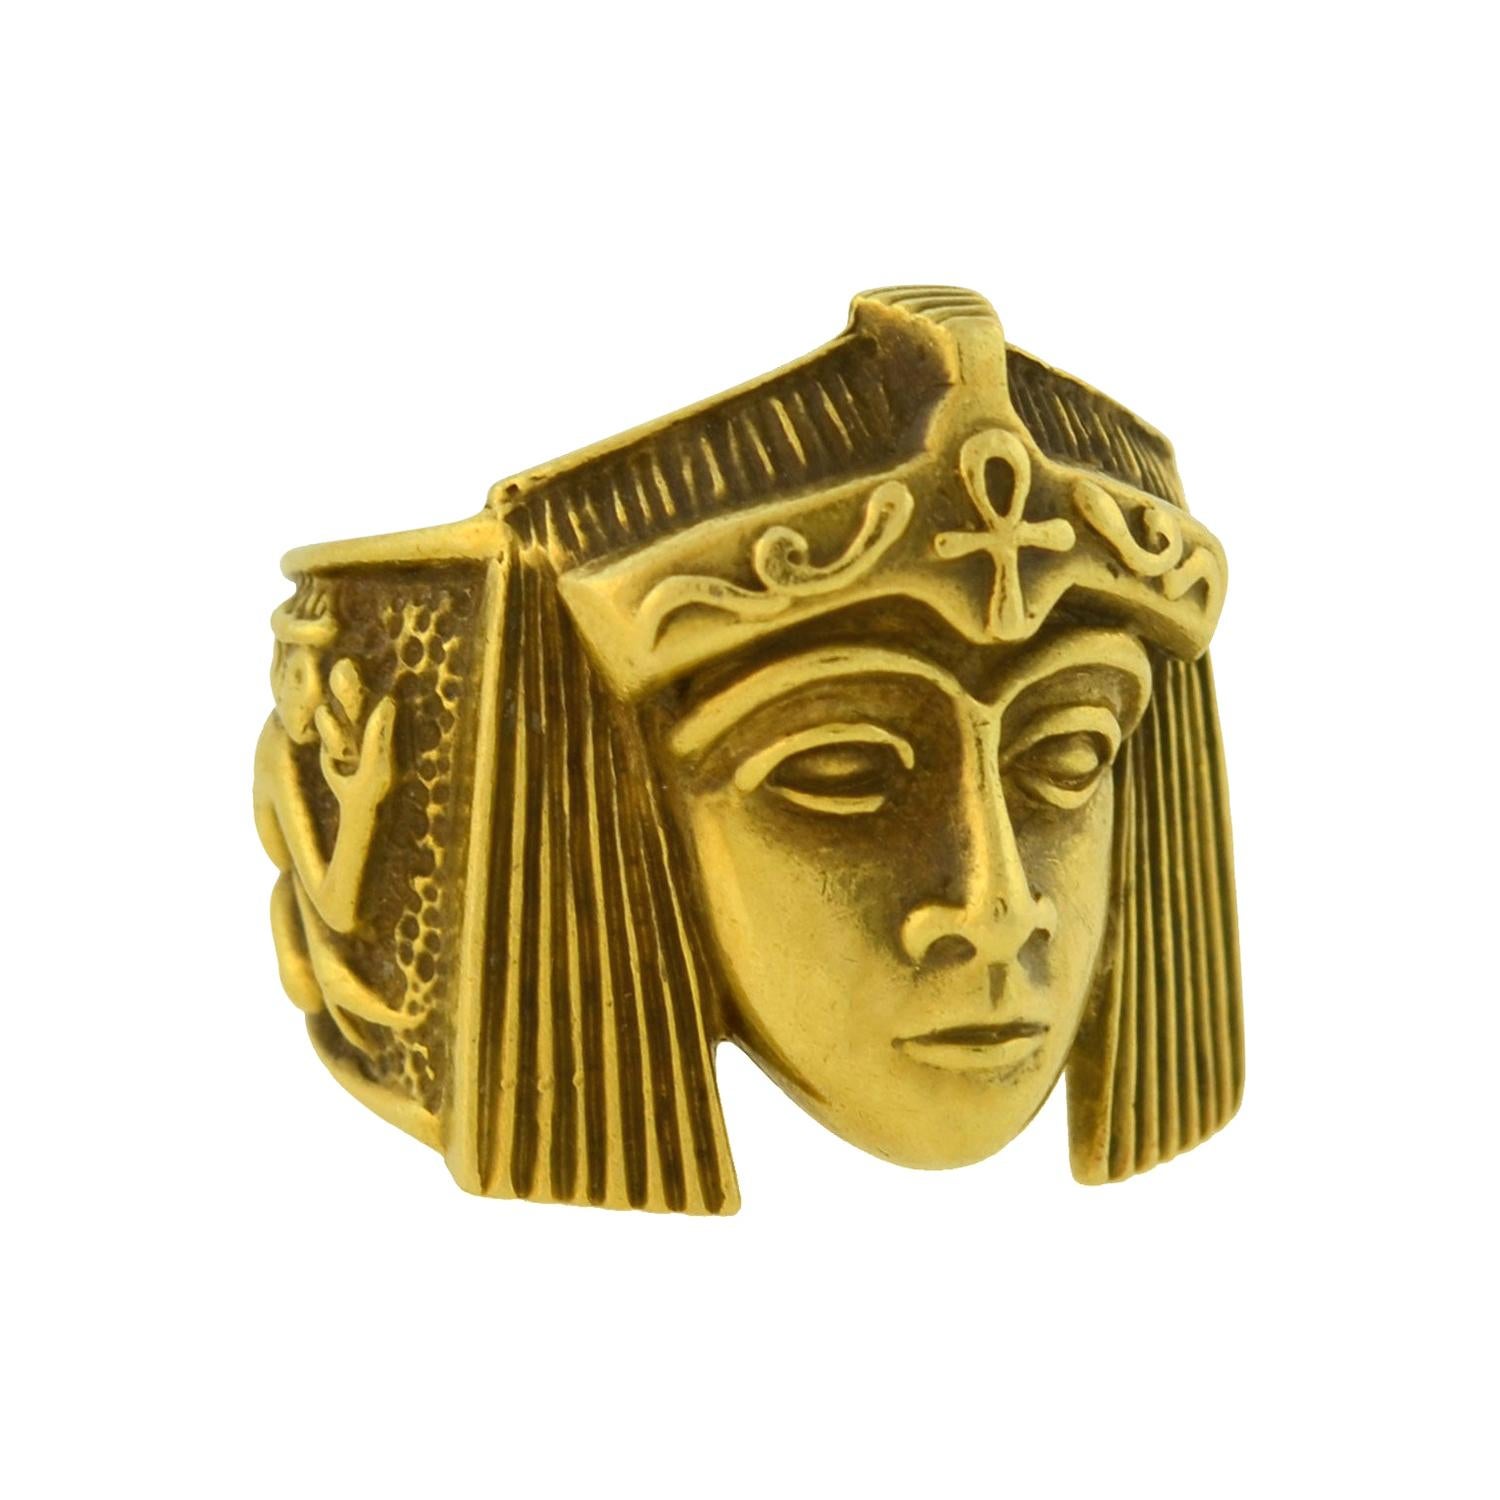 Vintage Sculptural Egyptian Revival Style Ring